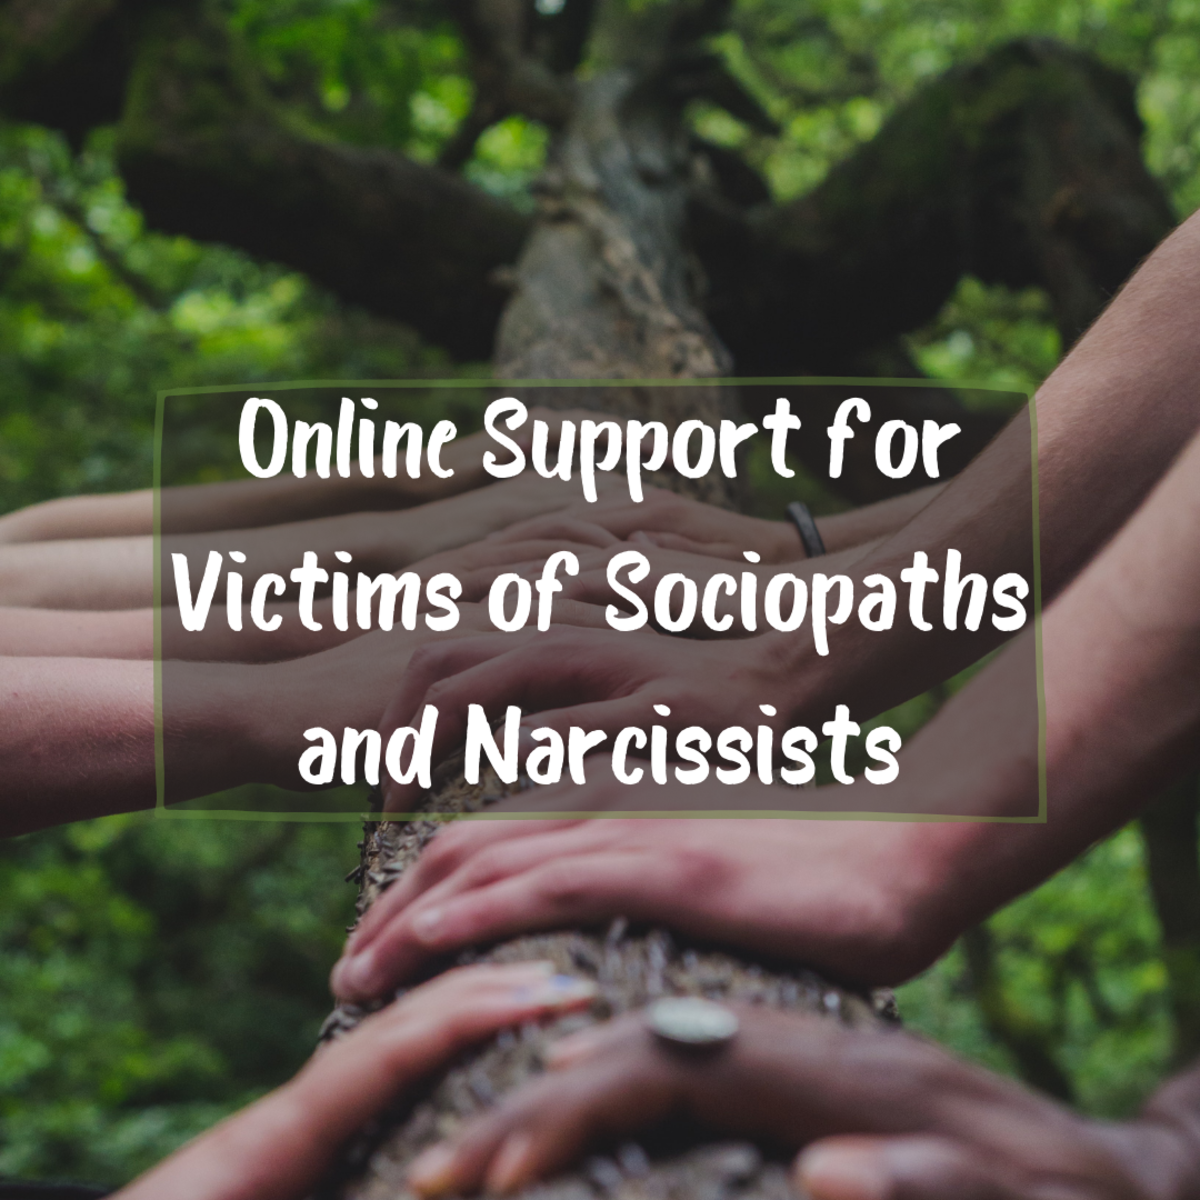 Online Support for Victims of Sociopaths and Narcissists